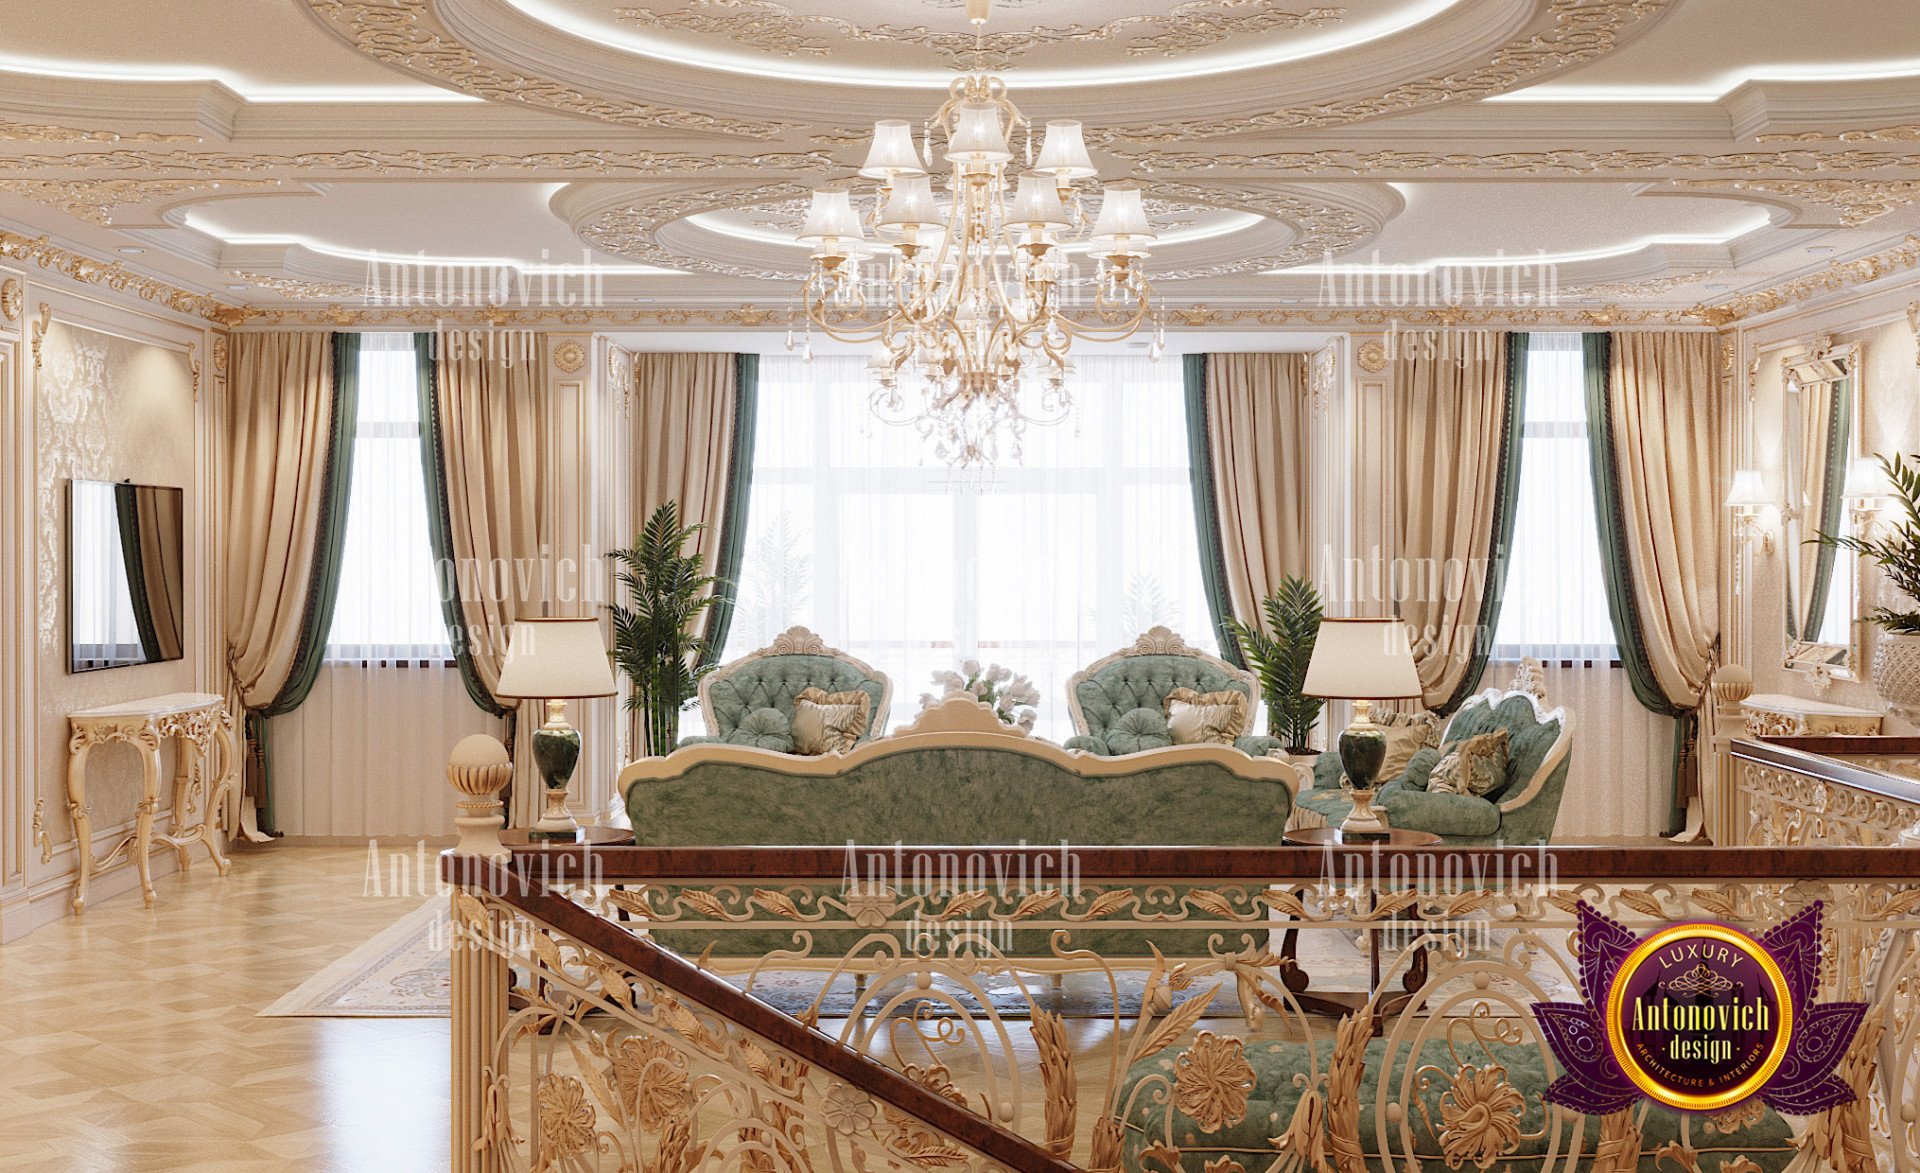 All You Need to Know About Luxury Interior Design